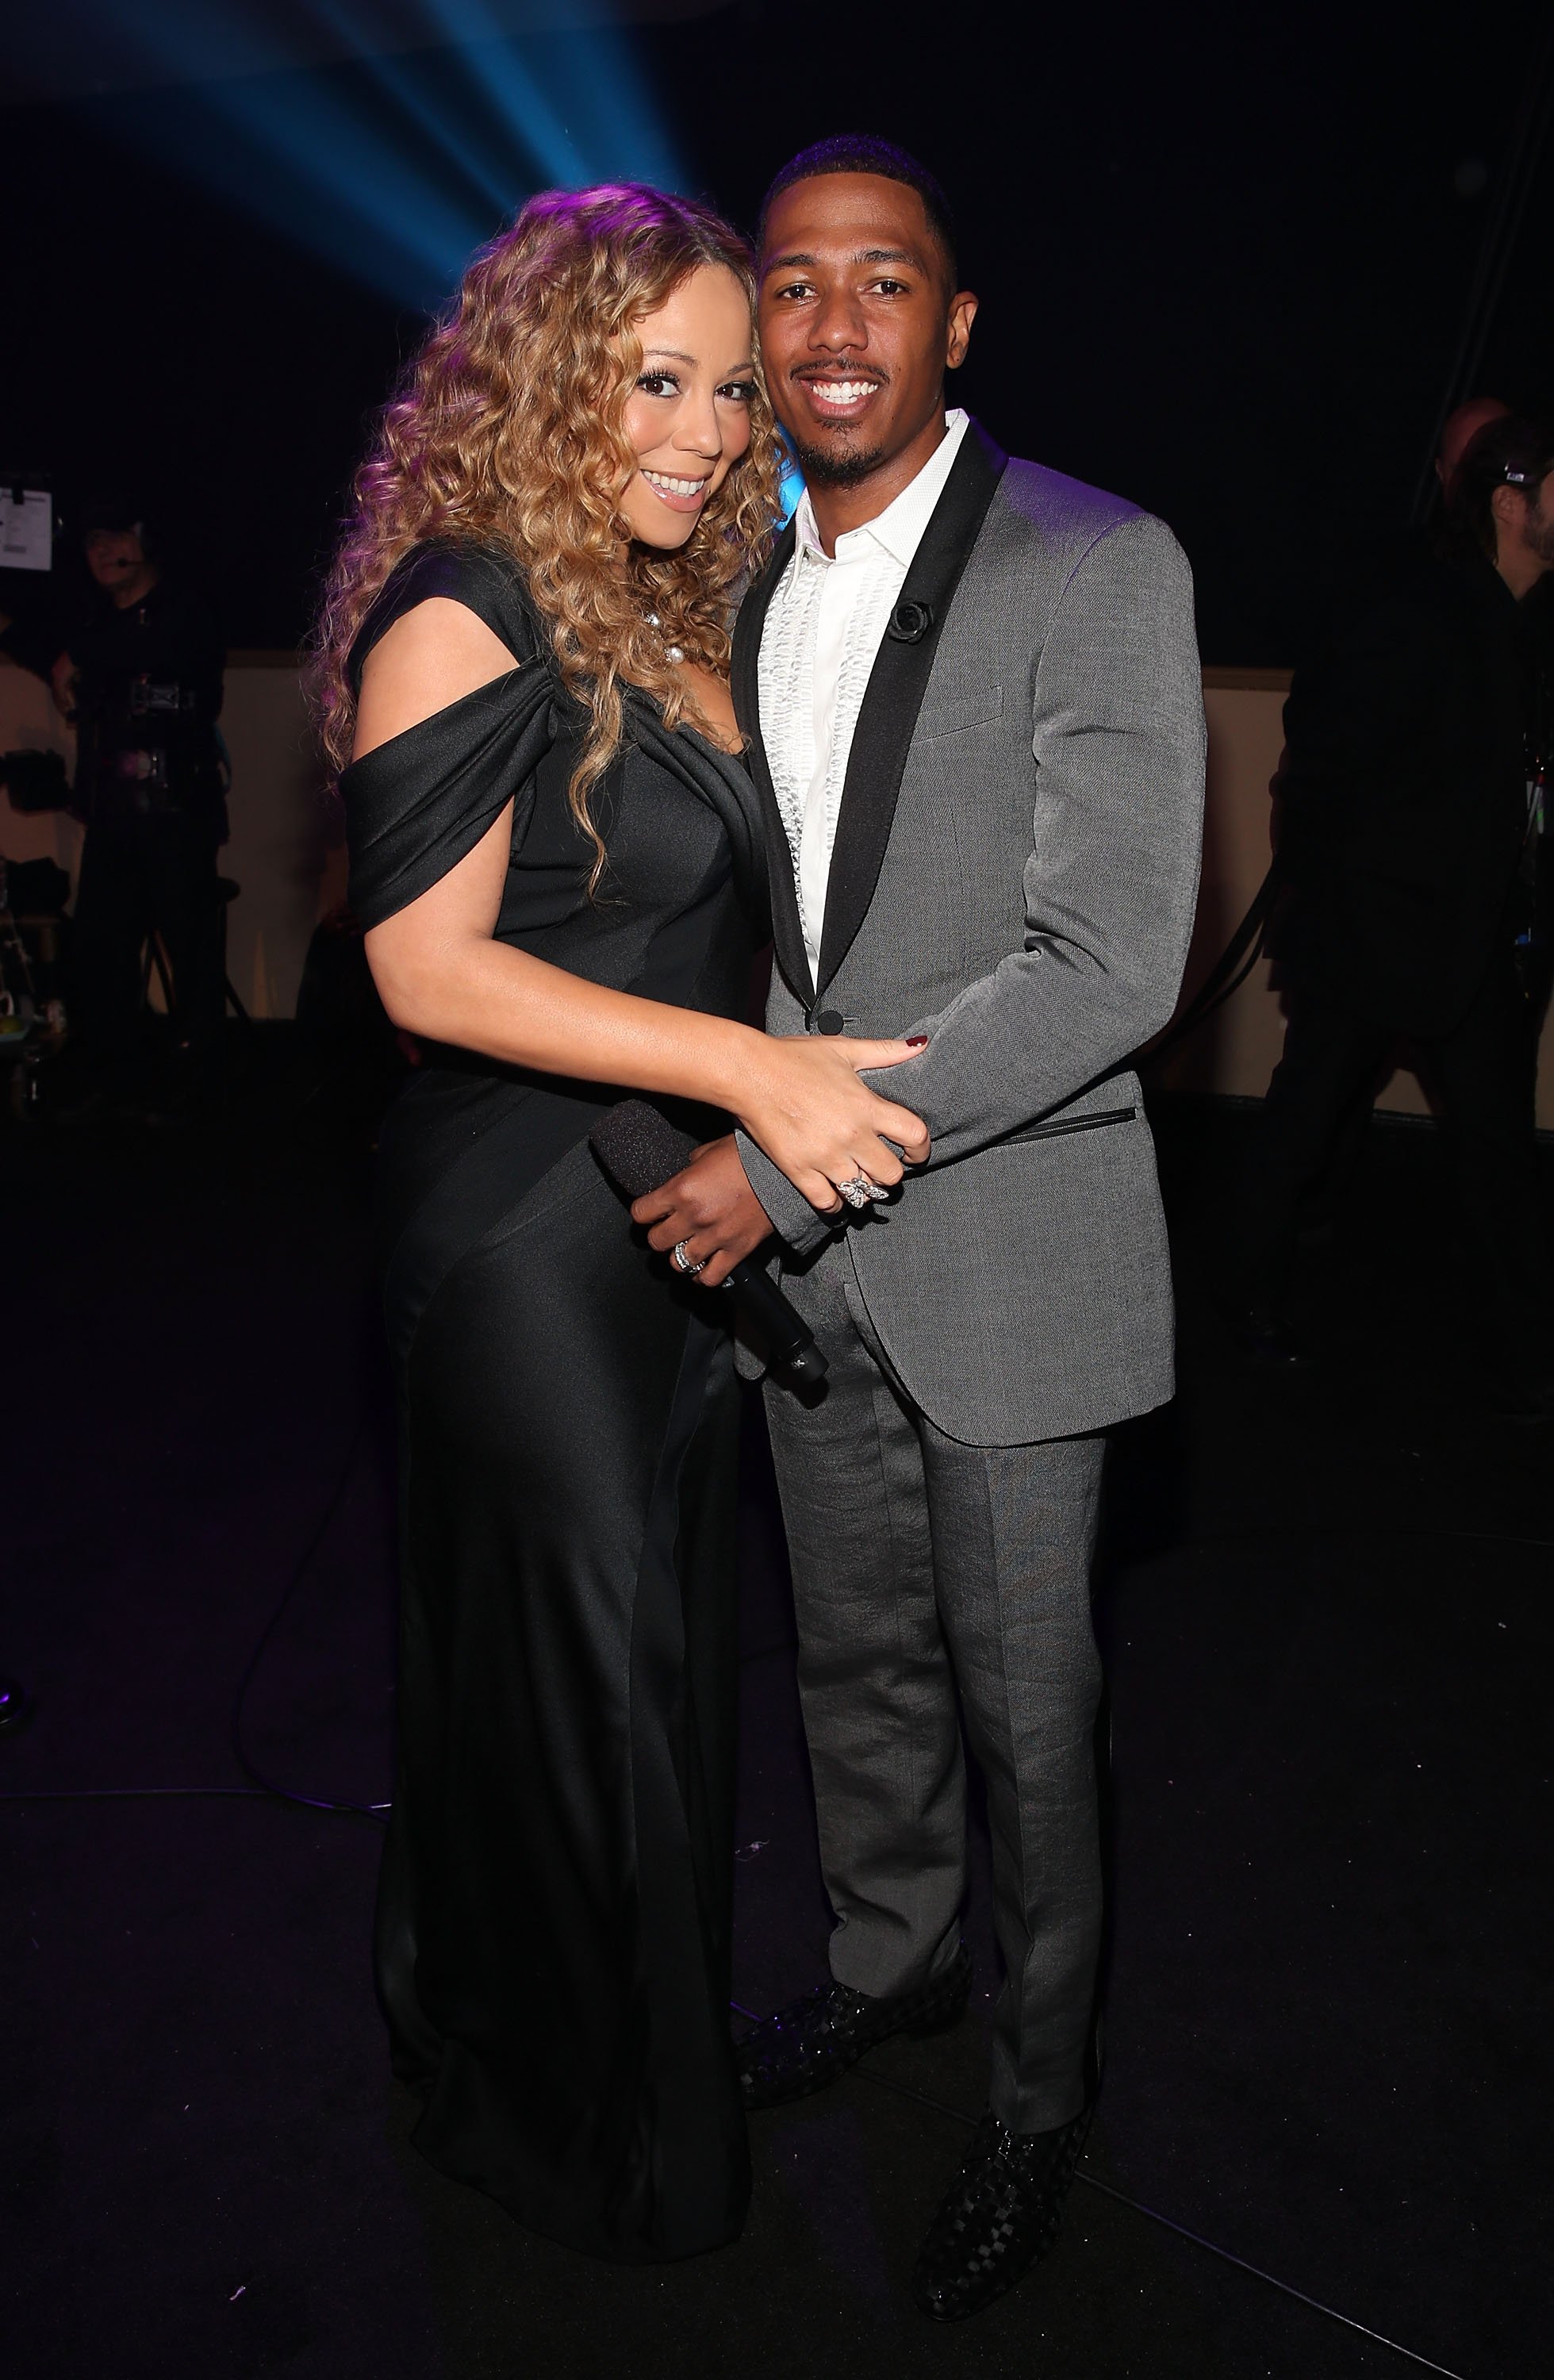  Mariah Carey and TeenNick Chairman and HALO Awards host Nick Cannon attend Nickelodeon's 2012 TeenNick HALO Awards at Hollywood Palladium on November 17, 2012, in Hollywood, California. | Source: Getty Images.